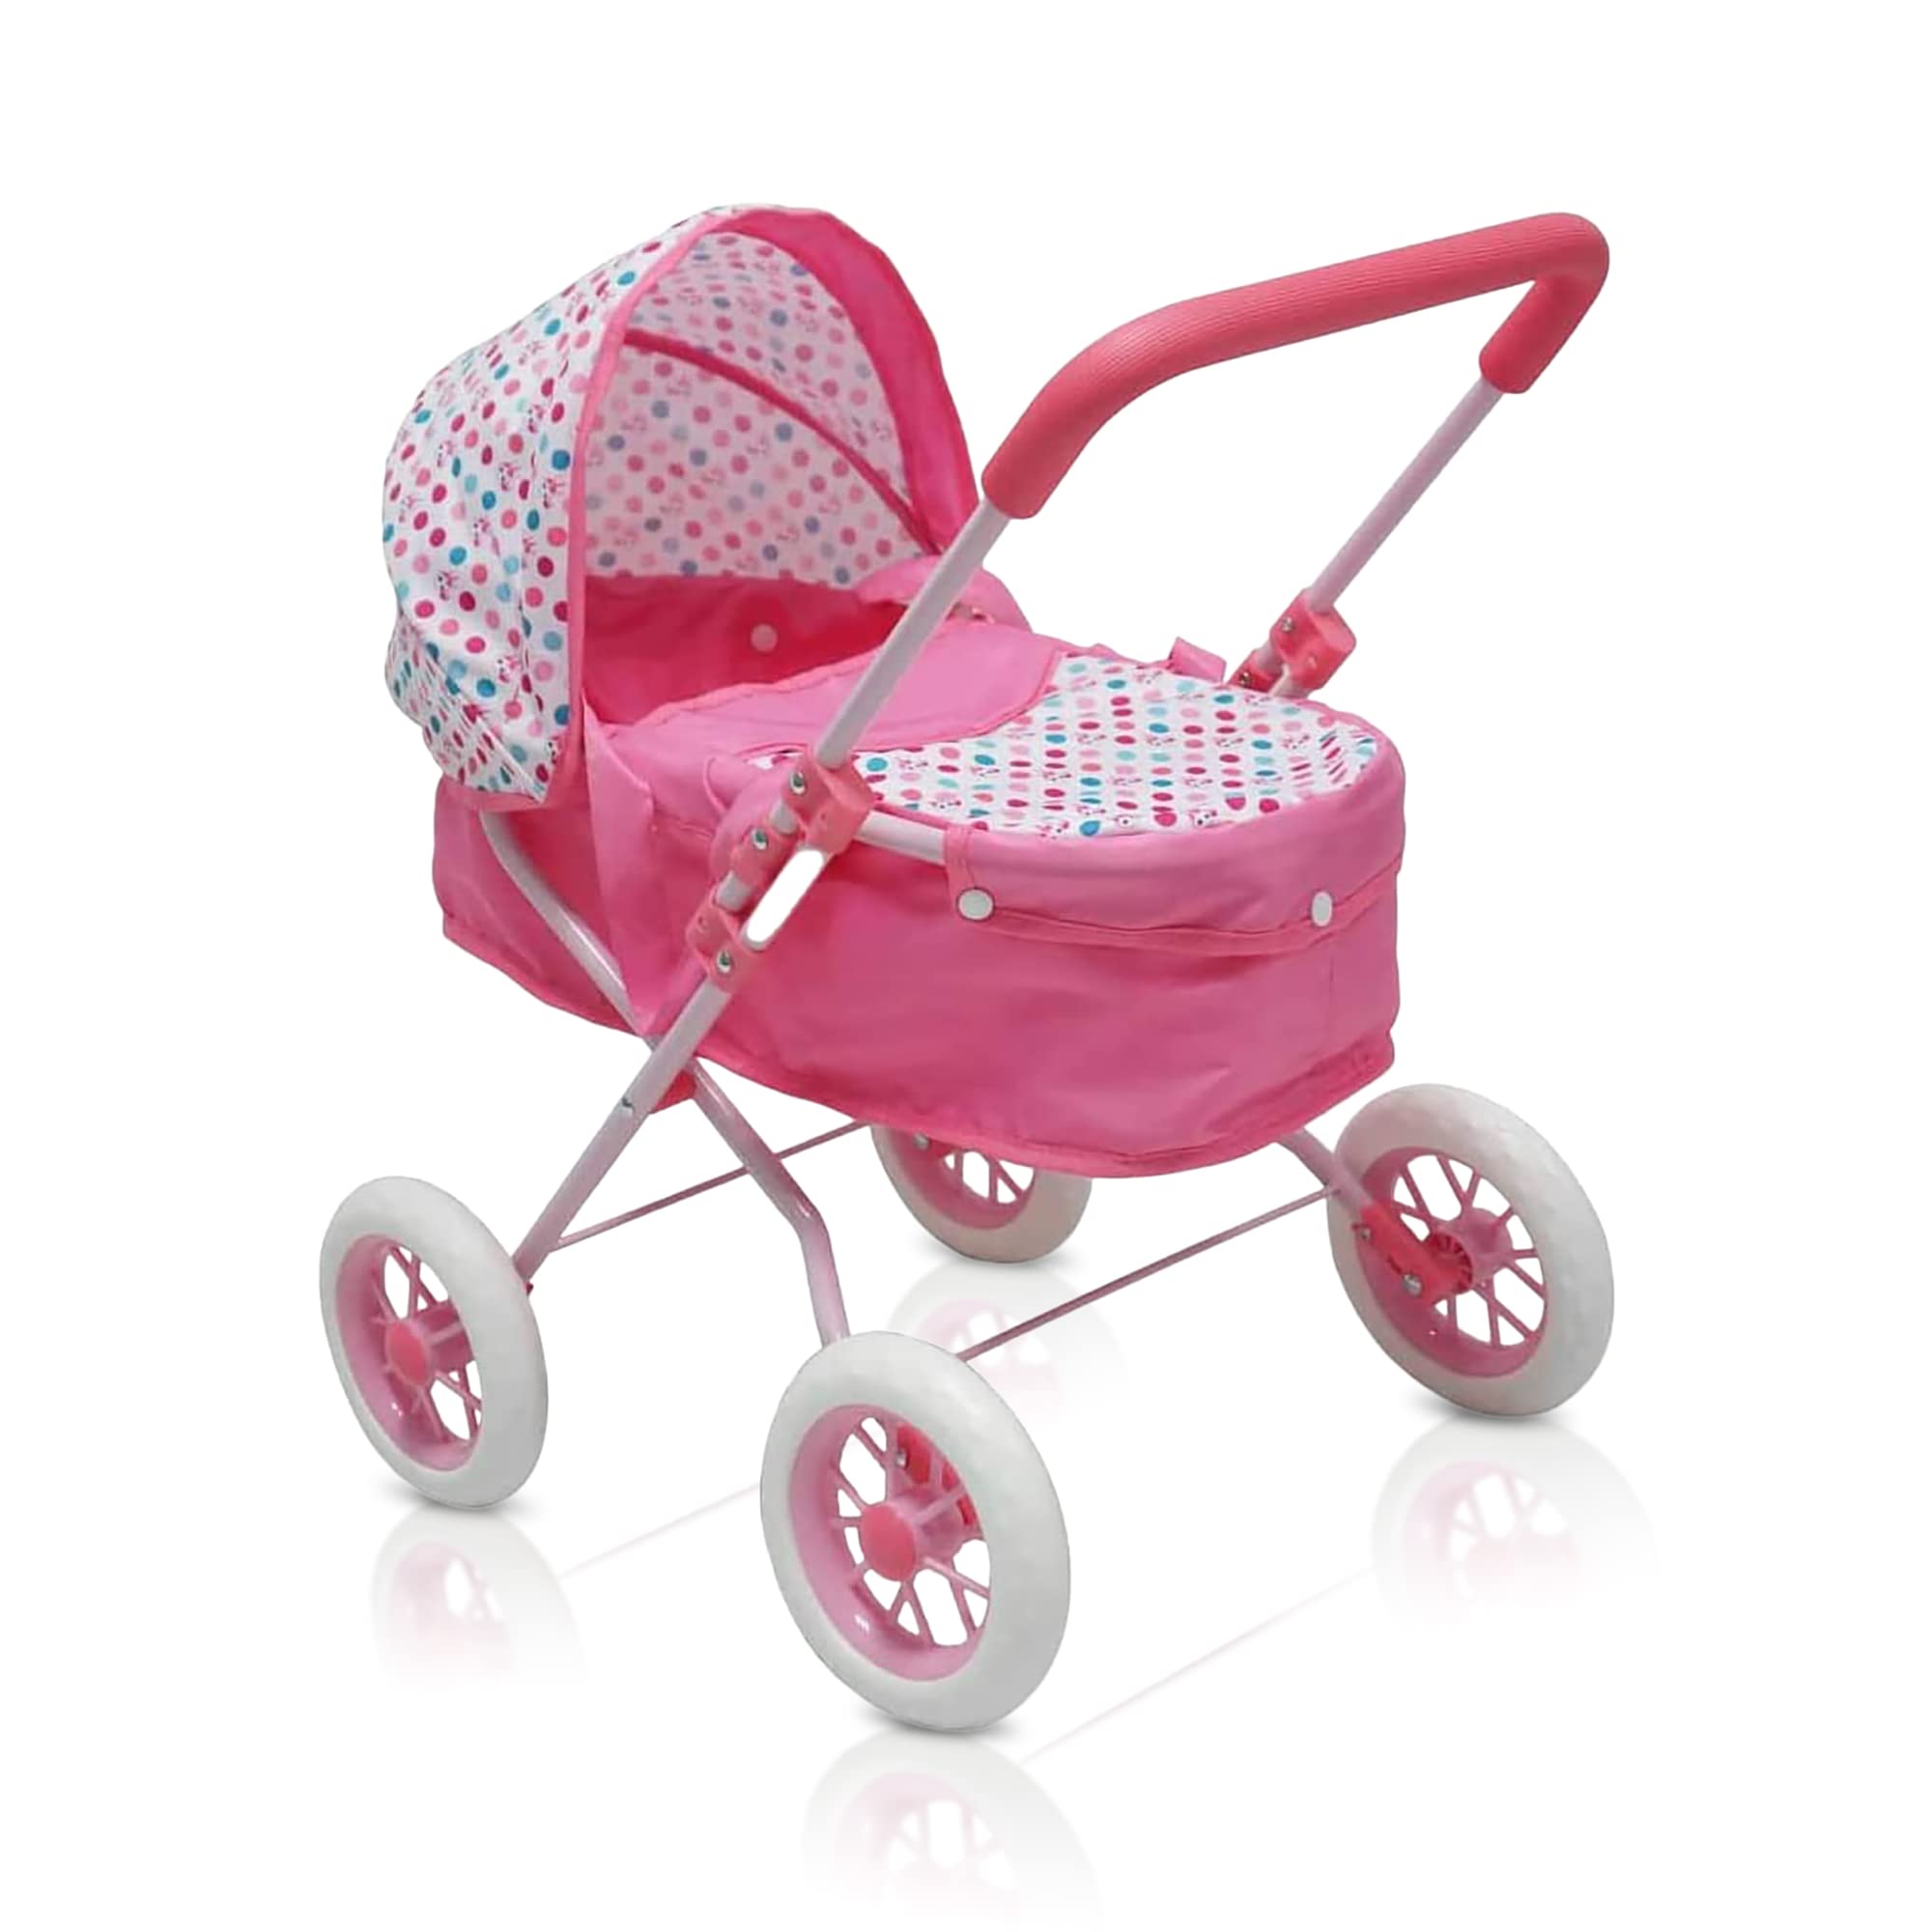 KOOKAMUNGA KIDS Baby Doll Stroller - Realistic 2 in 1 Baby Stroller for Dolls w/Detachable Bassinet – Toy Pram w/Carry Cot, Retractable Canopy & Soft Grip Handle - for Dolls up to 18" - Pink